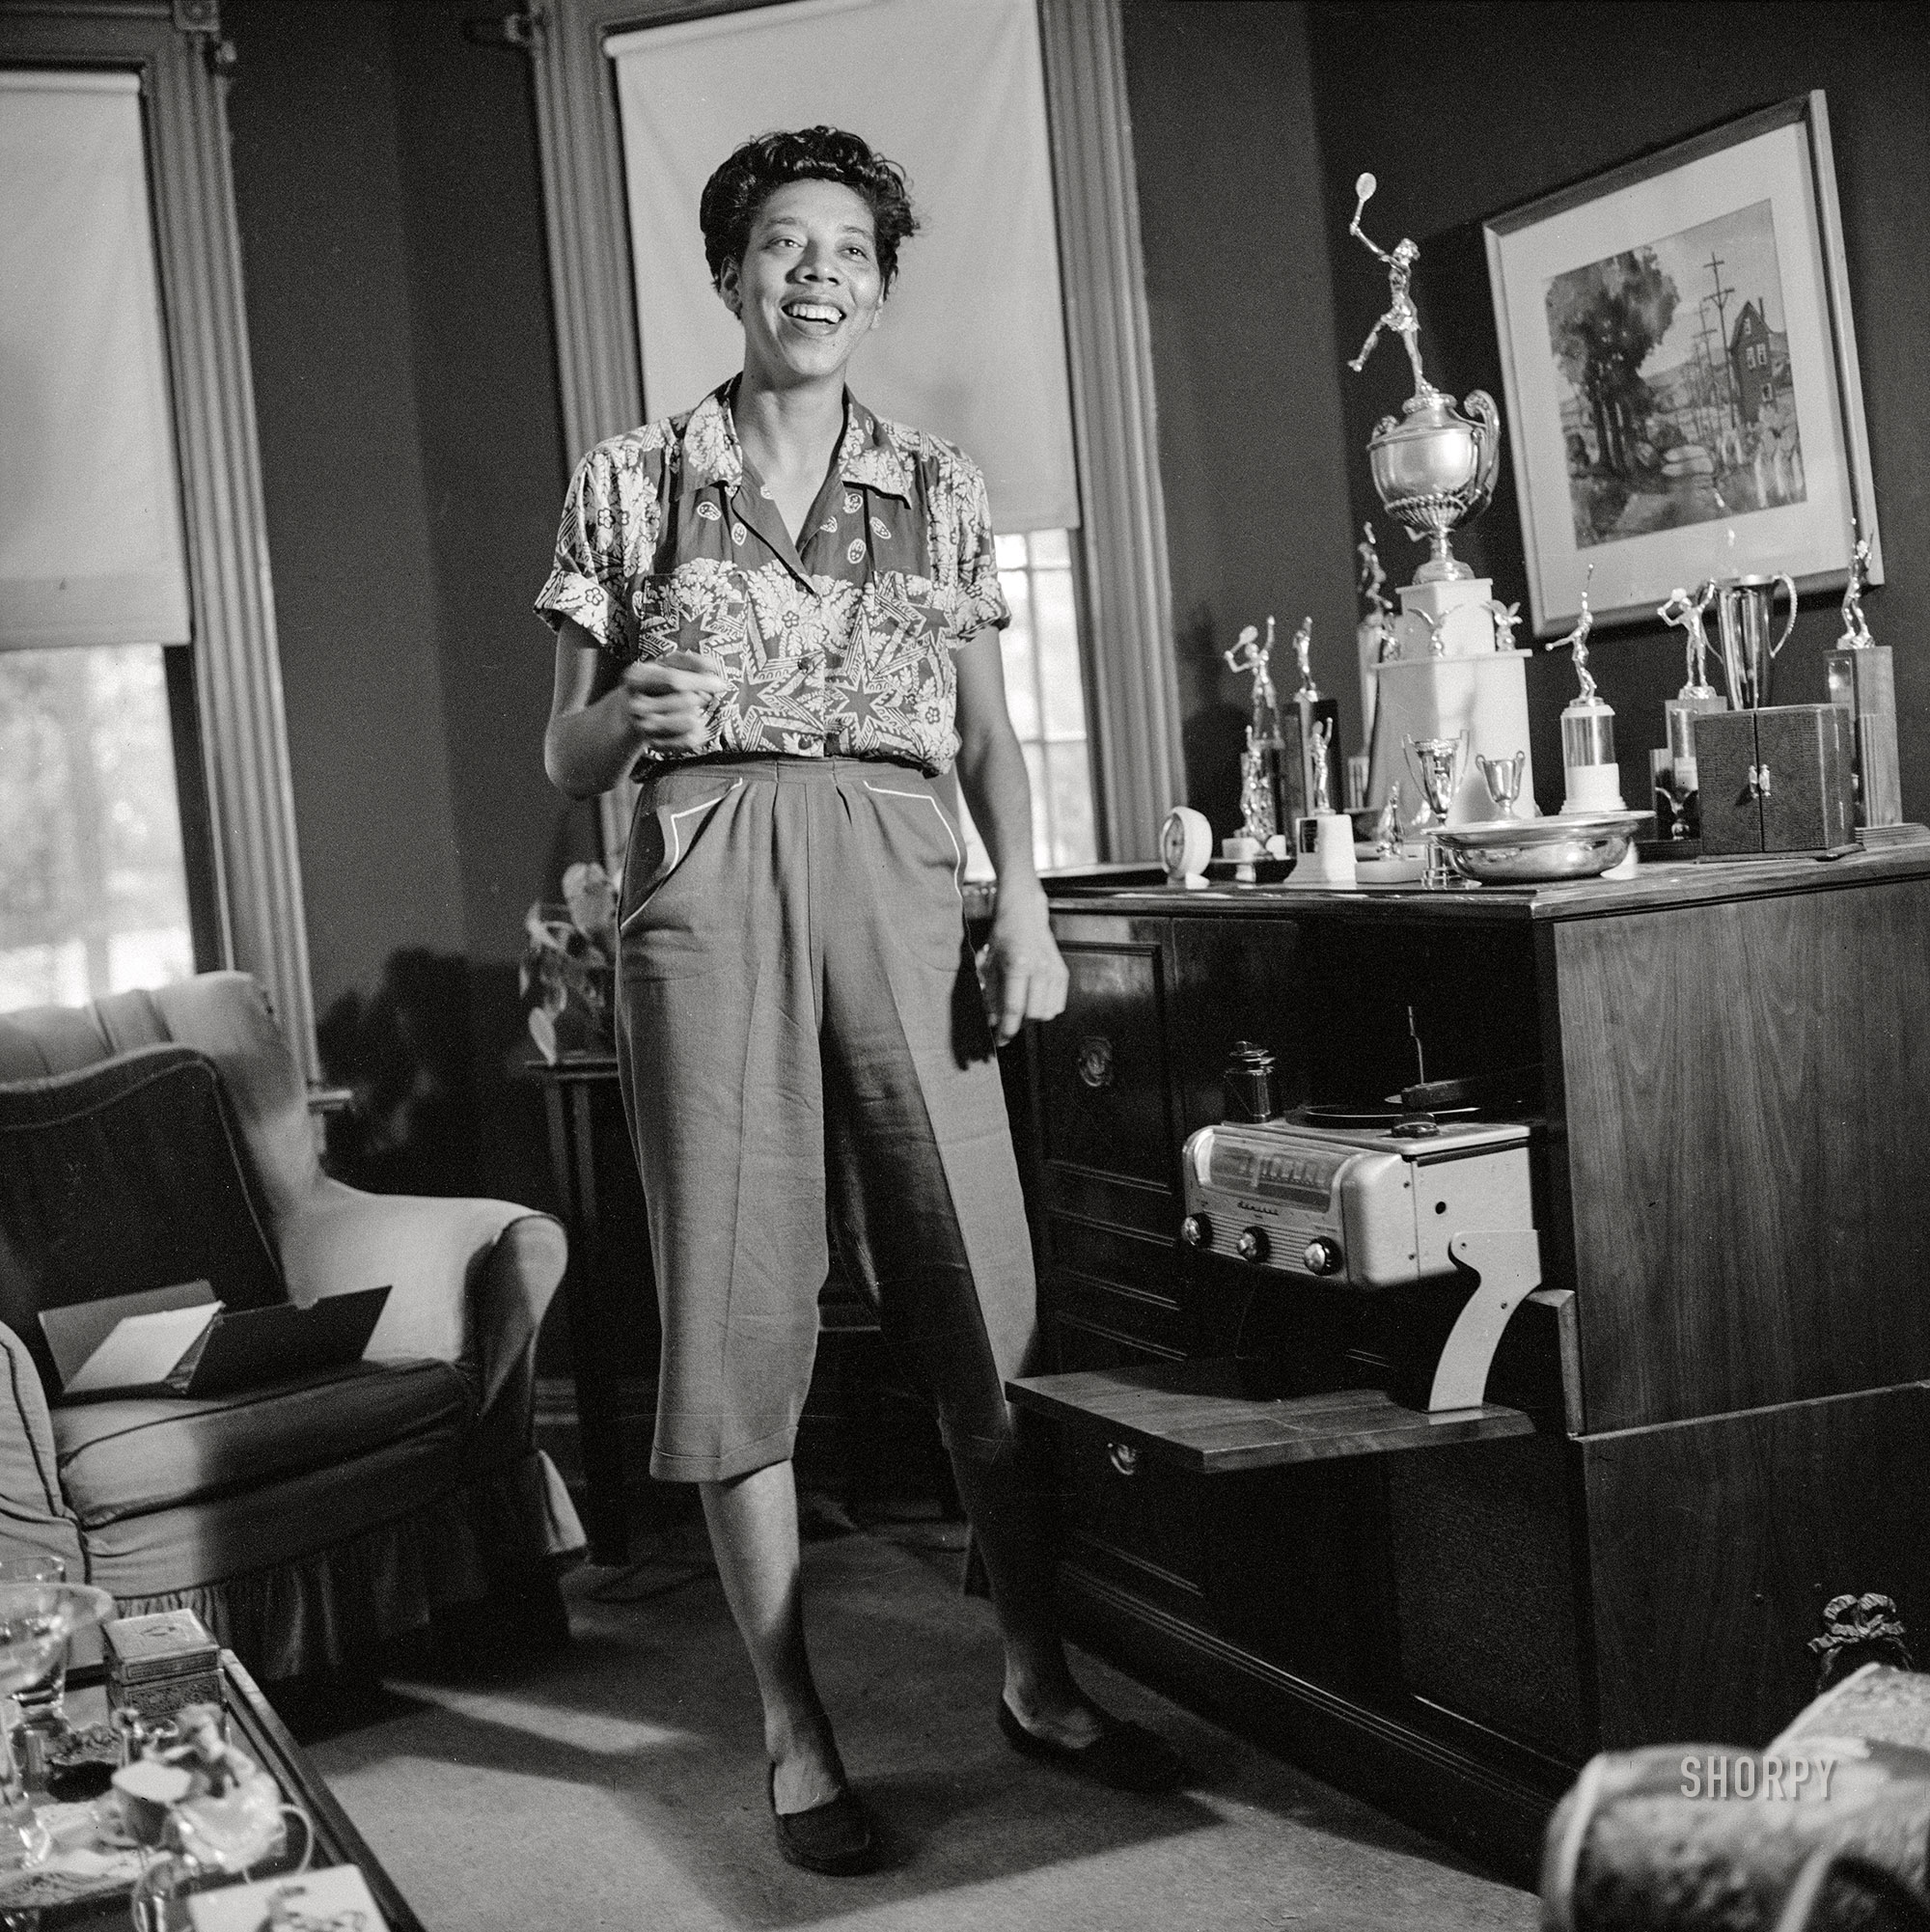 September 1957. New York. "Tennis champion Althea Gibson unpacking trophies at her home in Harlem." Medium format acetate negative by Genevieve Naylor for the Look magazine assignment "Althea Gibson: Tragic Success Story." View full size.